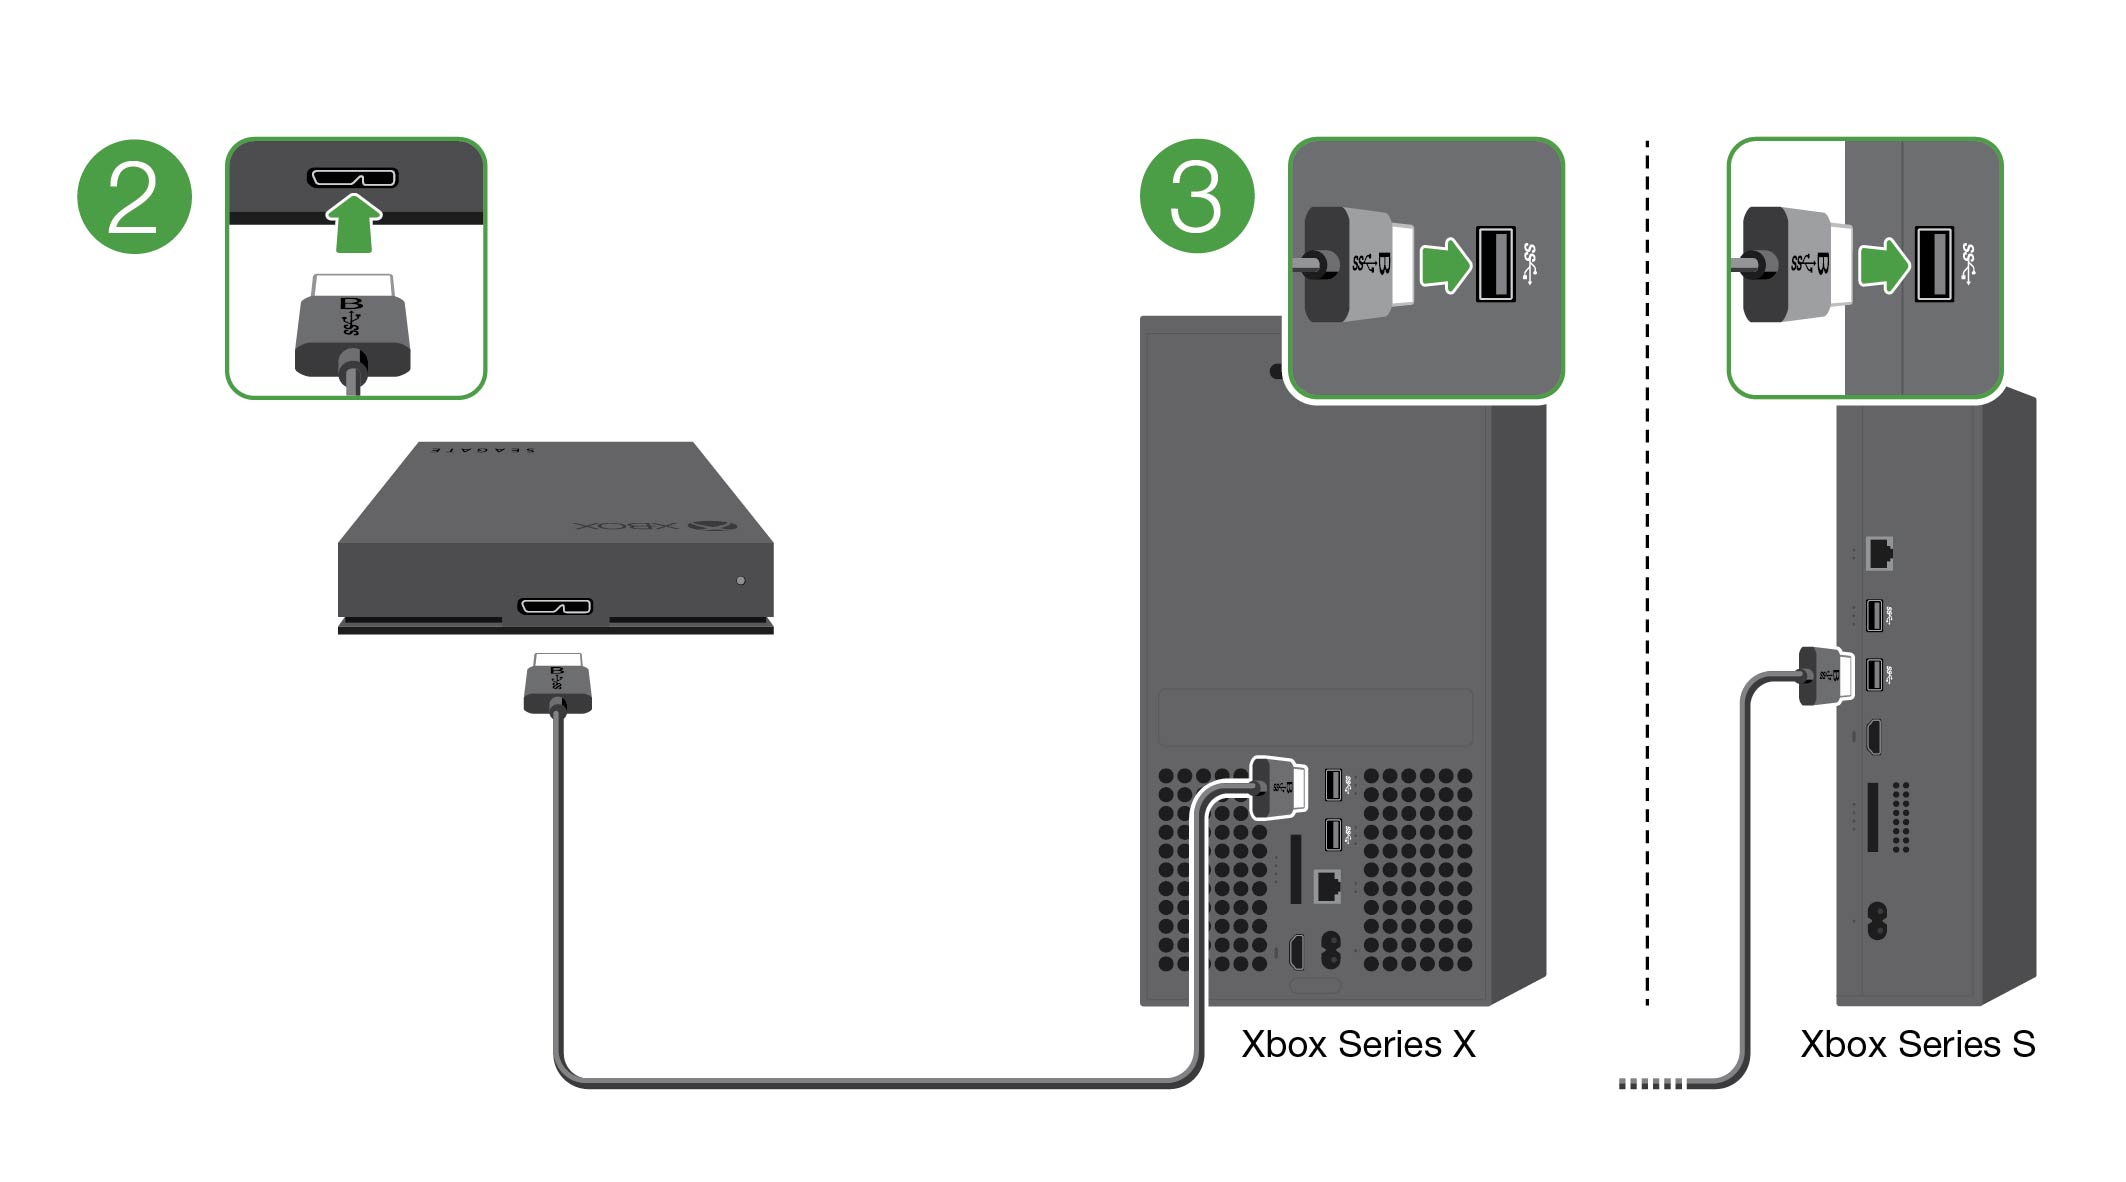 How to Add and Use an External Hard Drive with Xbox Series X or S